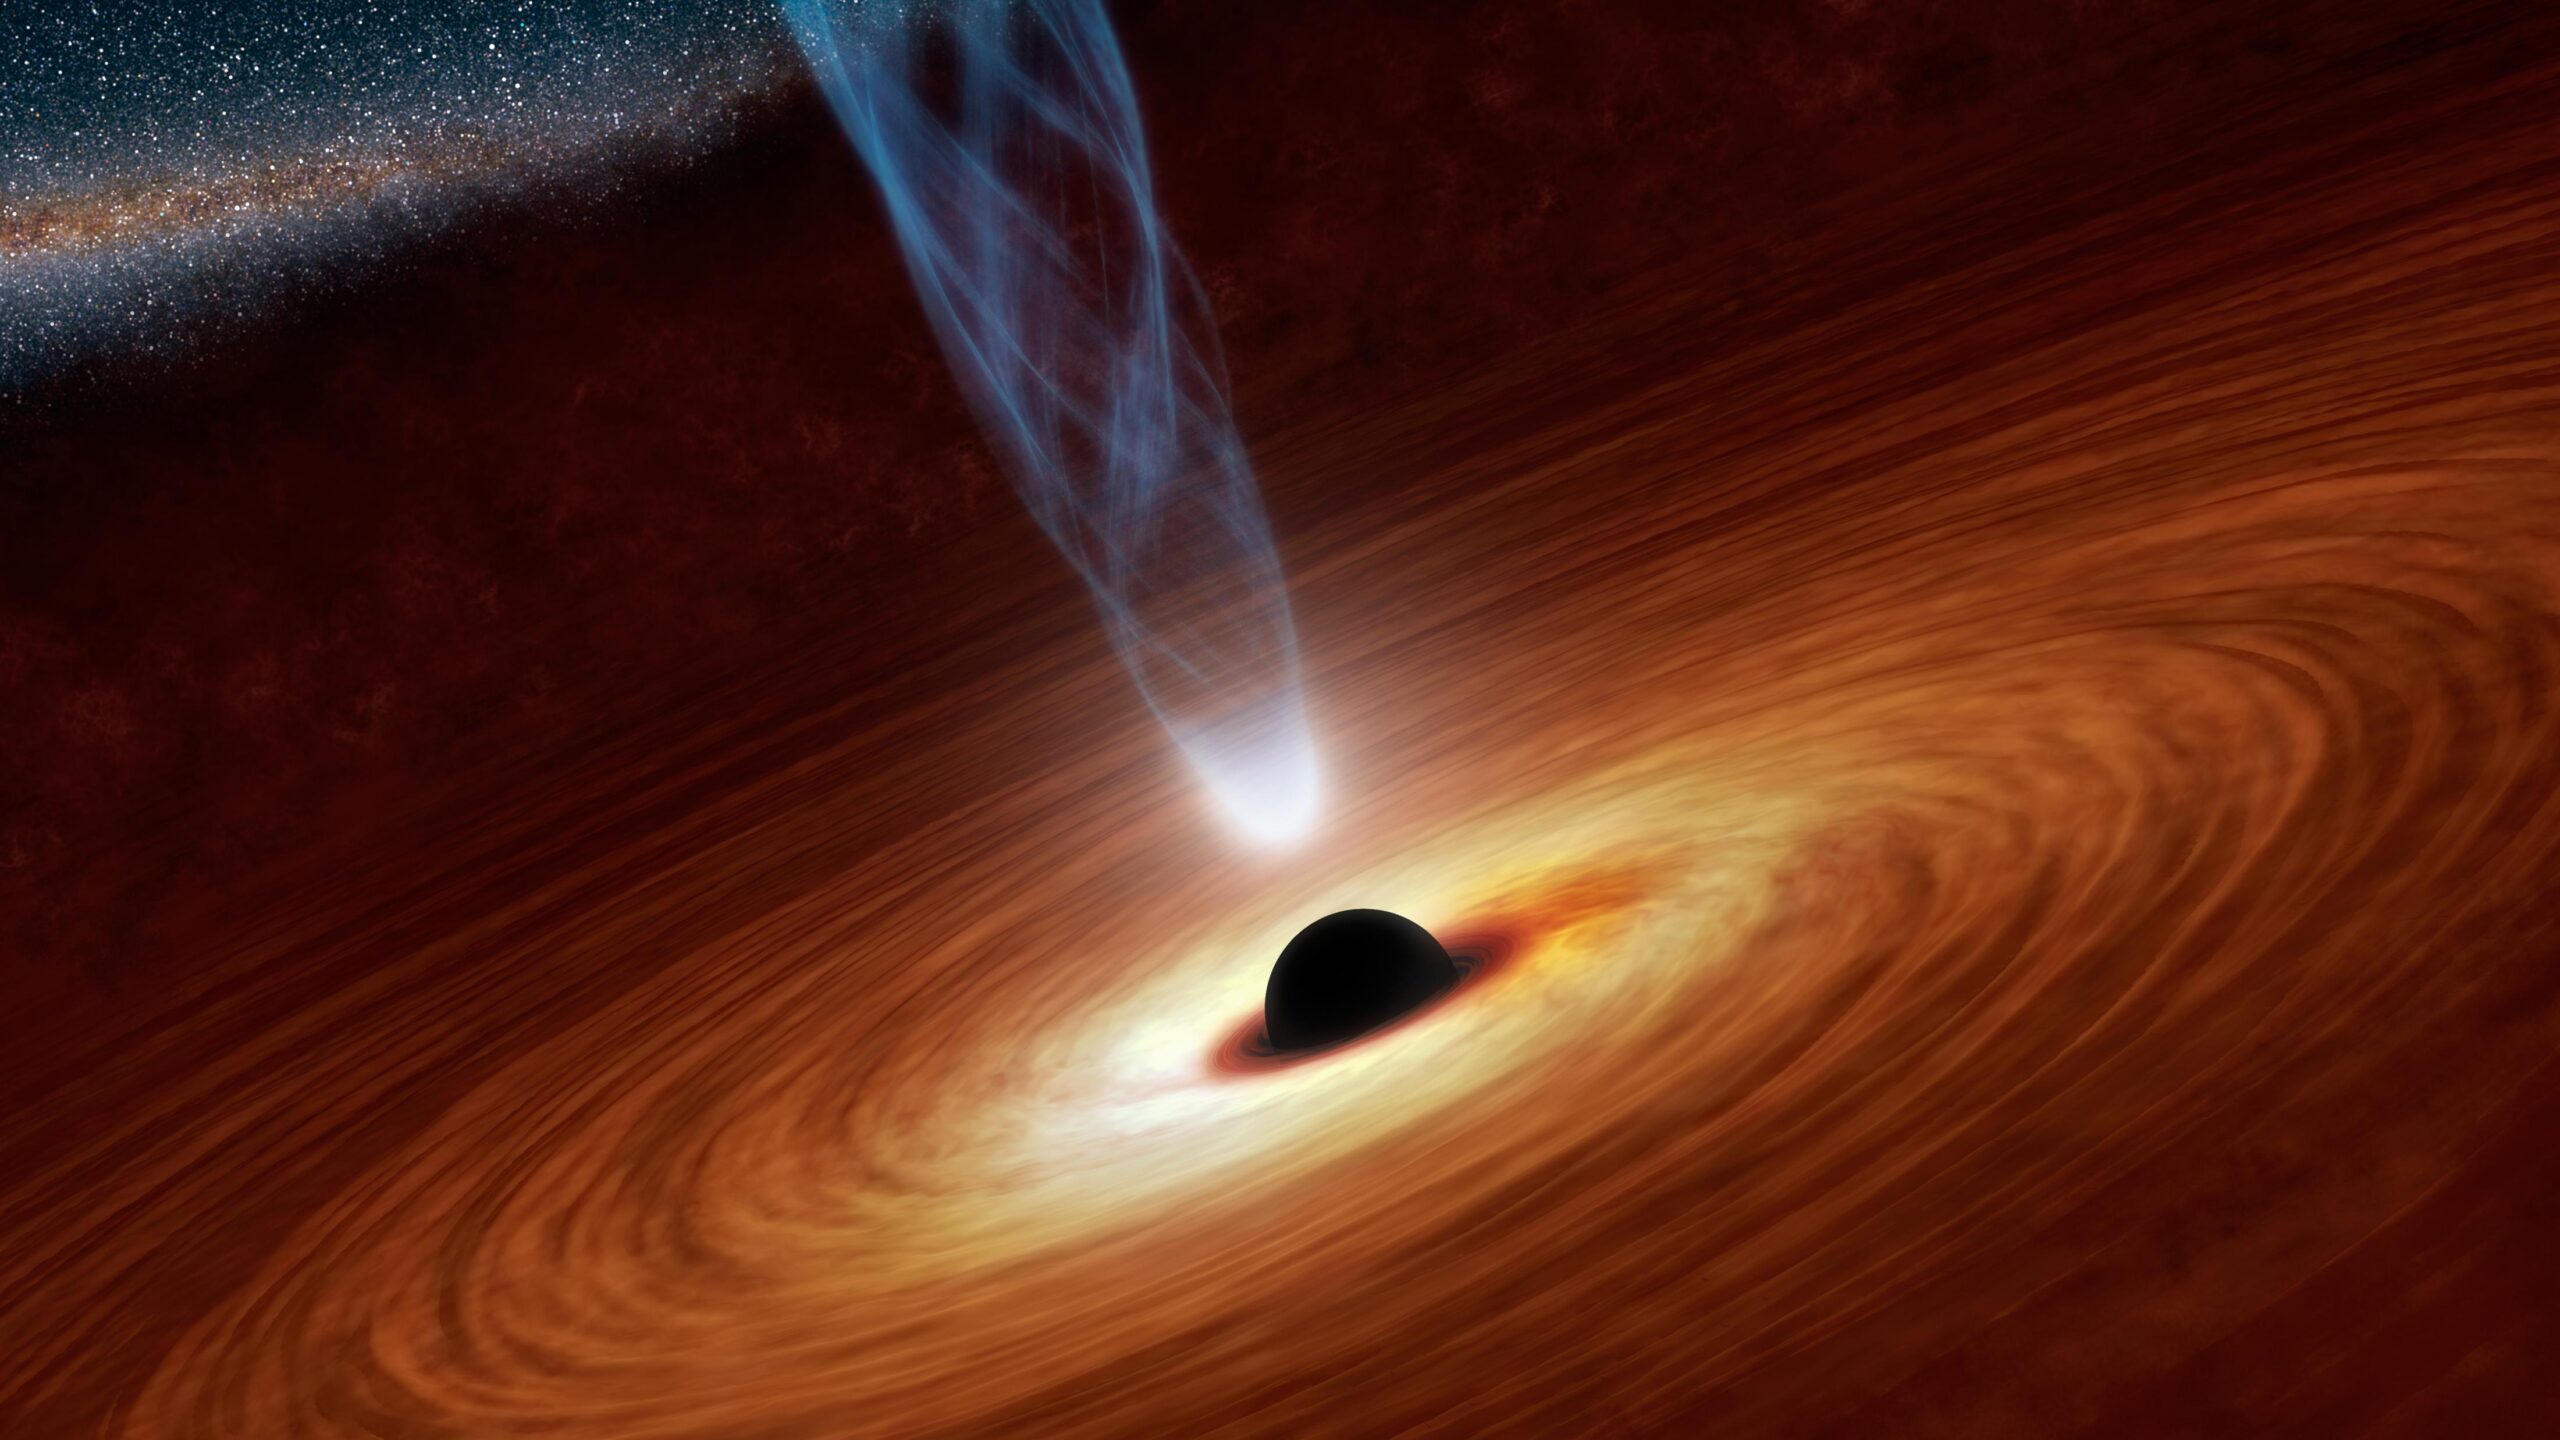 Black Holes: Monsters in Space (Artist's Concept) CREDIT: NASA/JPL-Caltech